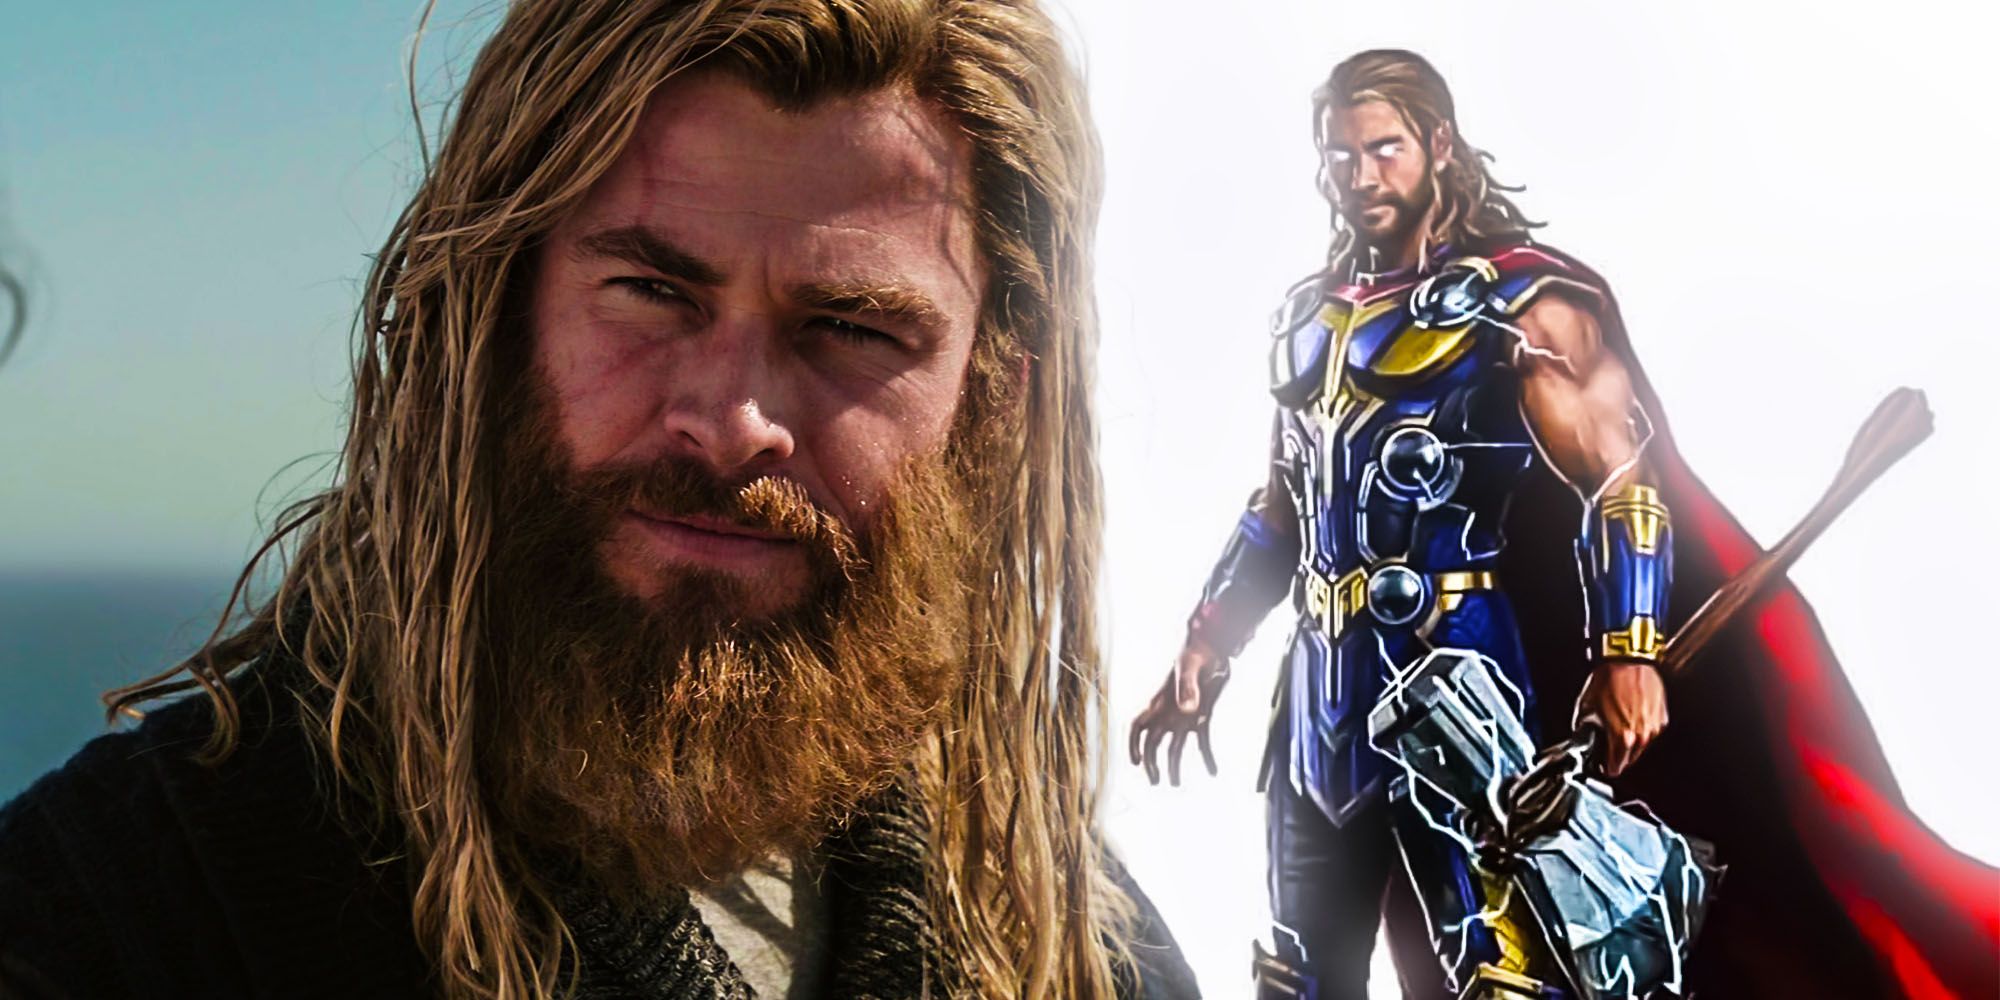 Thor love and thunder perfect after Avengers Endgame